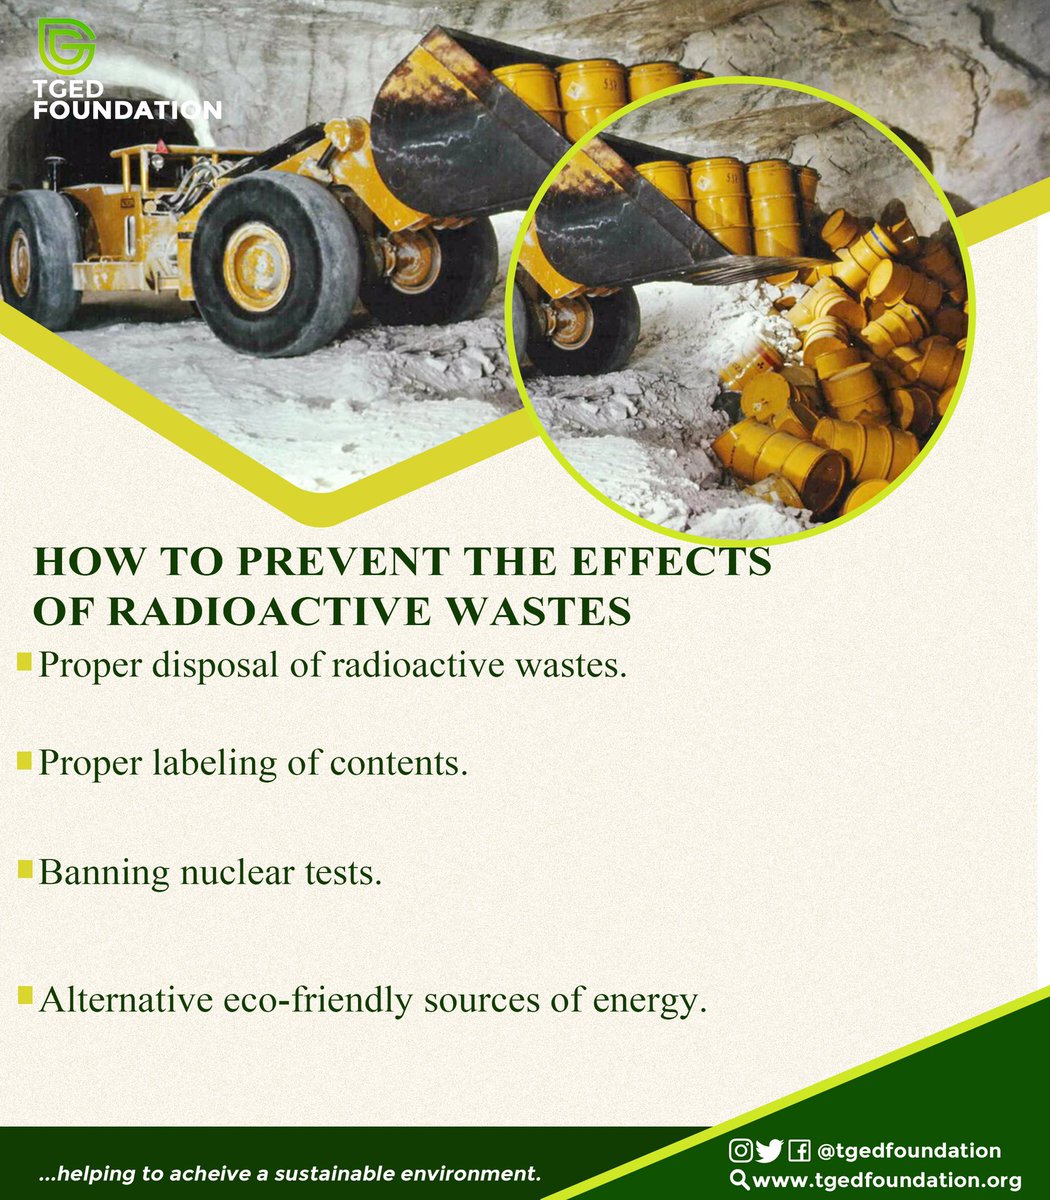 Since radioactive waste materials cannot be degraded through biological or natural processes, we must ensure that extreme care is taken to ensure their proper disposal.
#radioactivewater #radioactivefm #radioactivered #radioactivematerial #radioactivezone #radioactivedecay